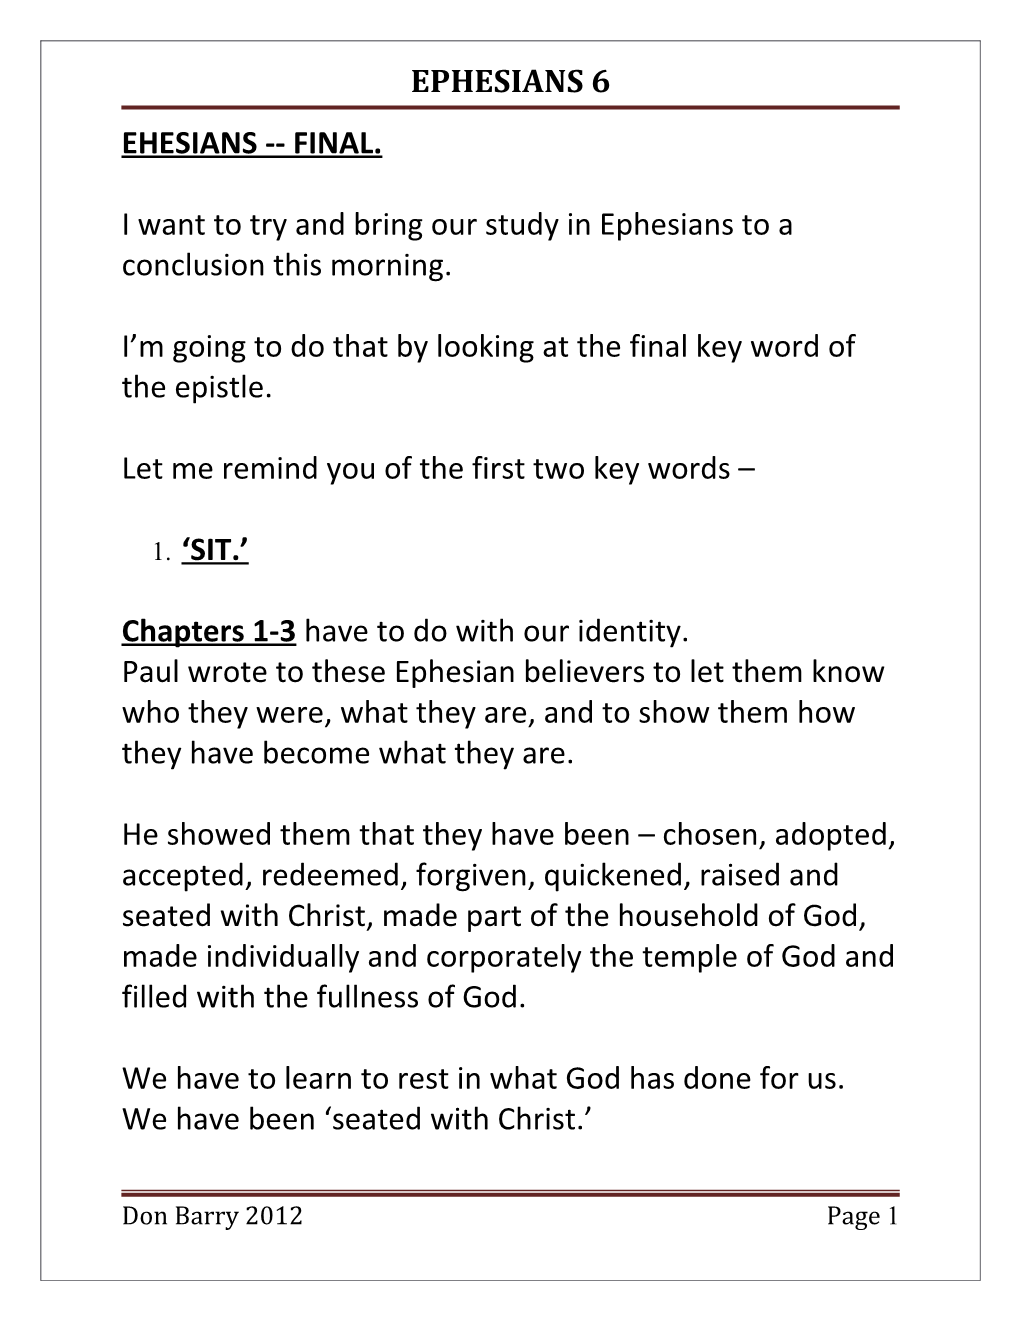 I Want to Try and Bring Our Study in Ephesians to a Conclusion This Morning